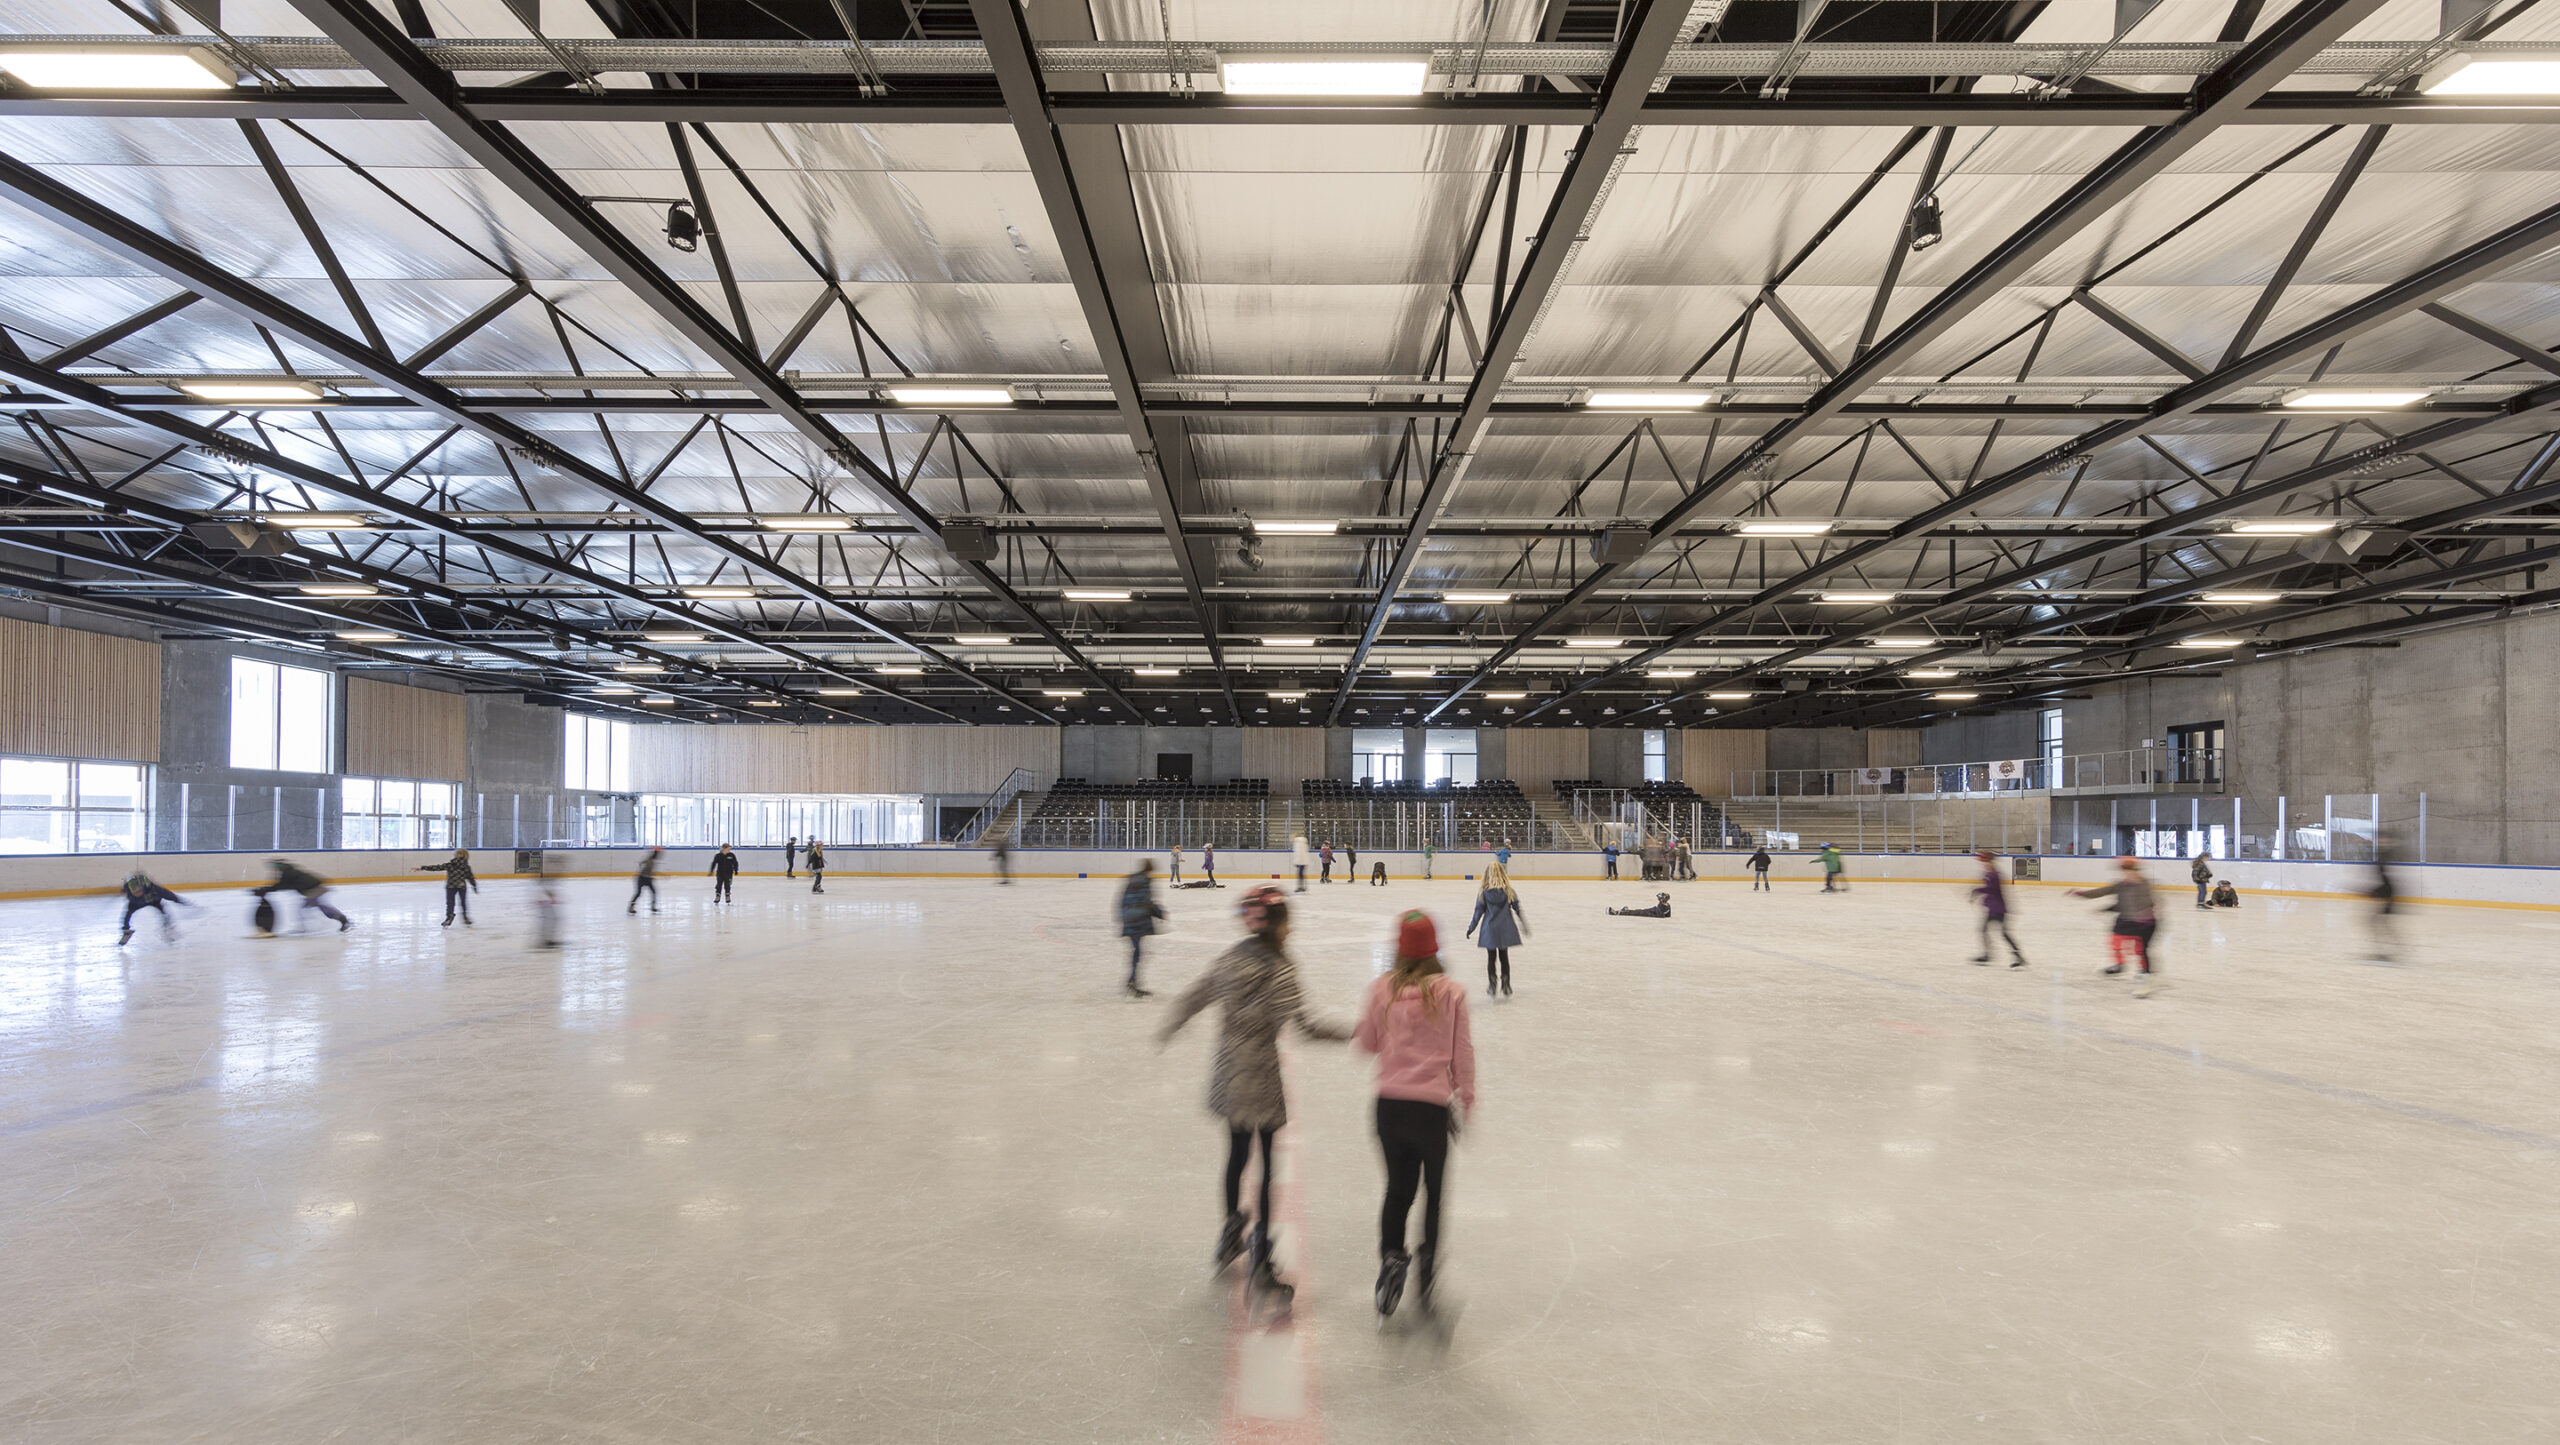 Skaters glide across the Ørestad Ice Rink, as expansive windows reveal the surrounding outdoor scenery.